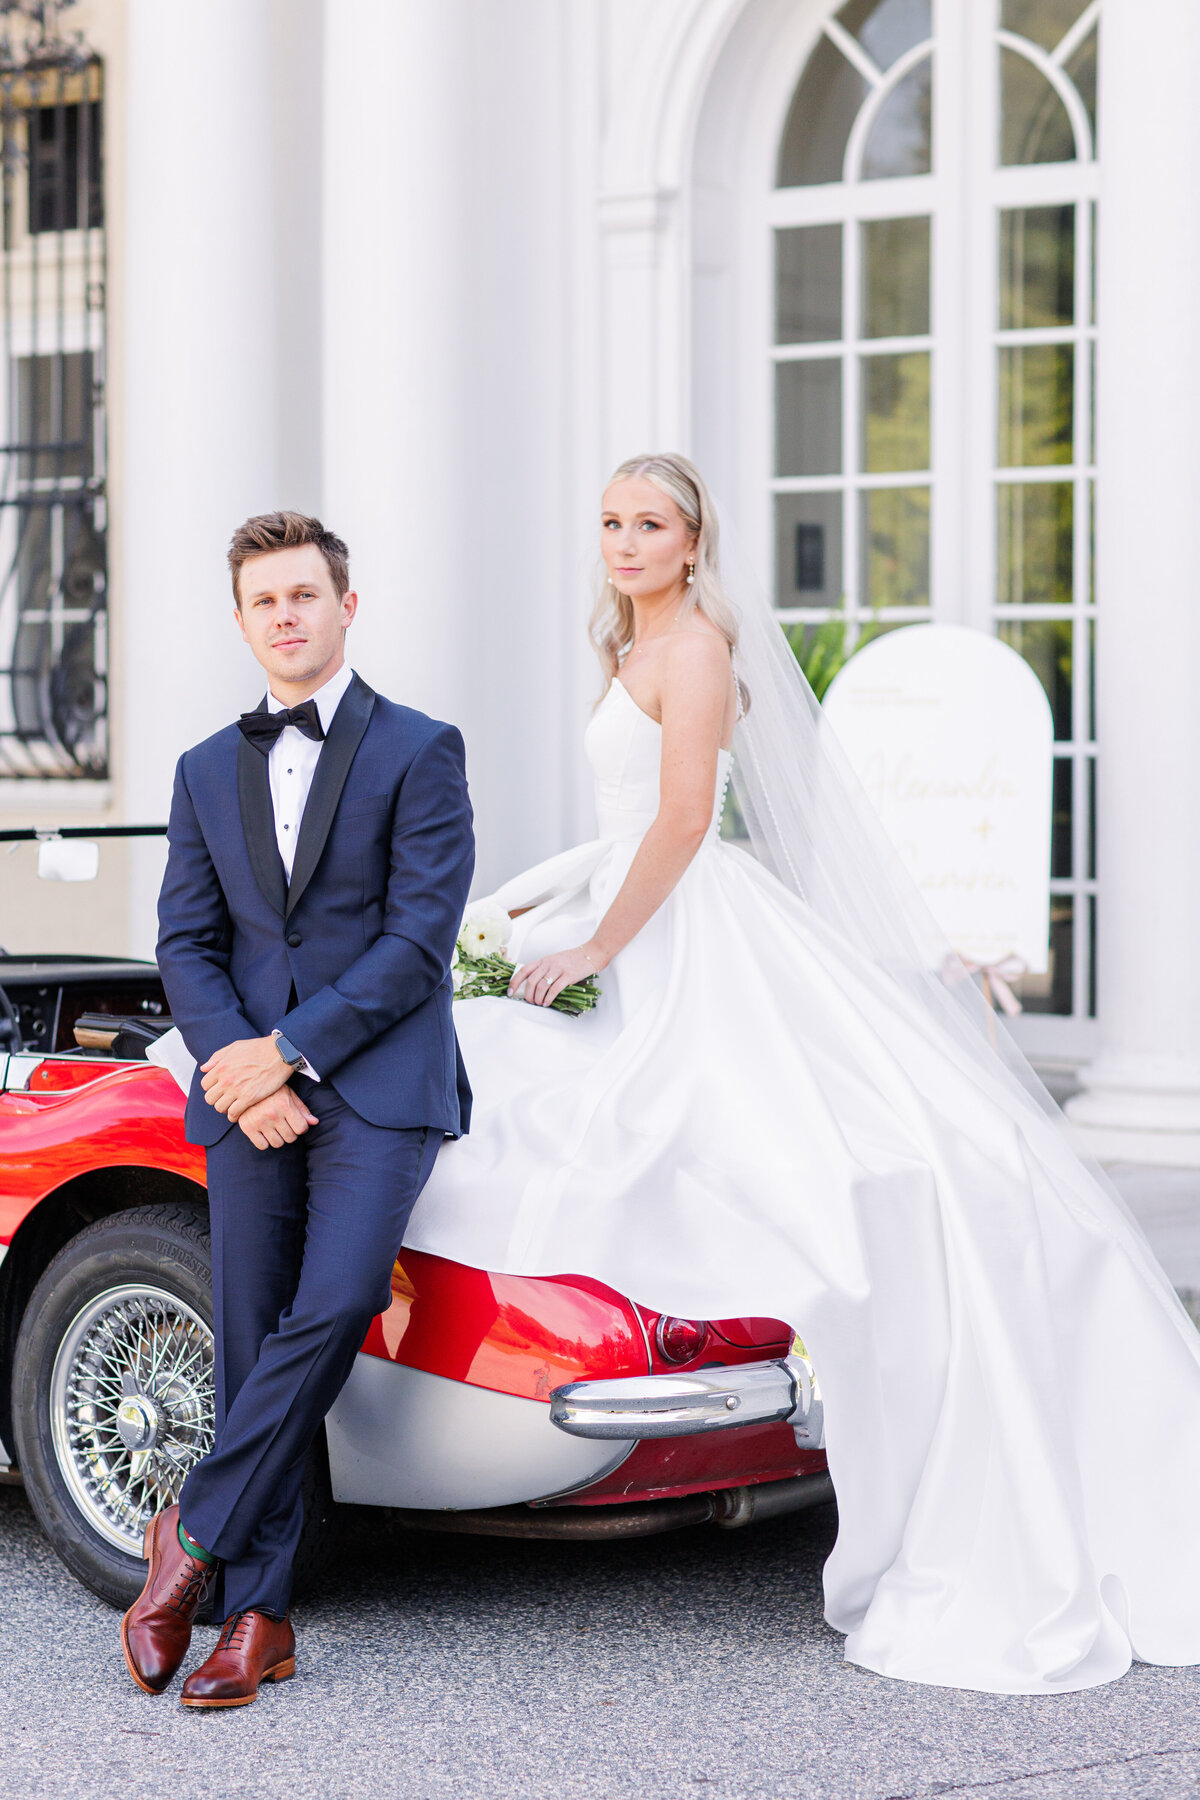 Groom leaning against a vintage car while bride sits on the car